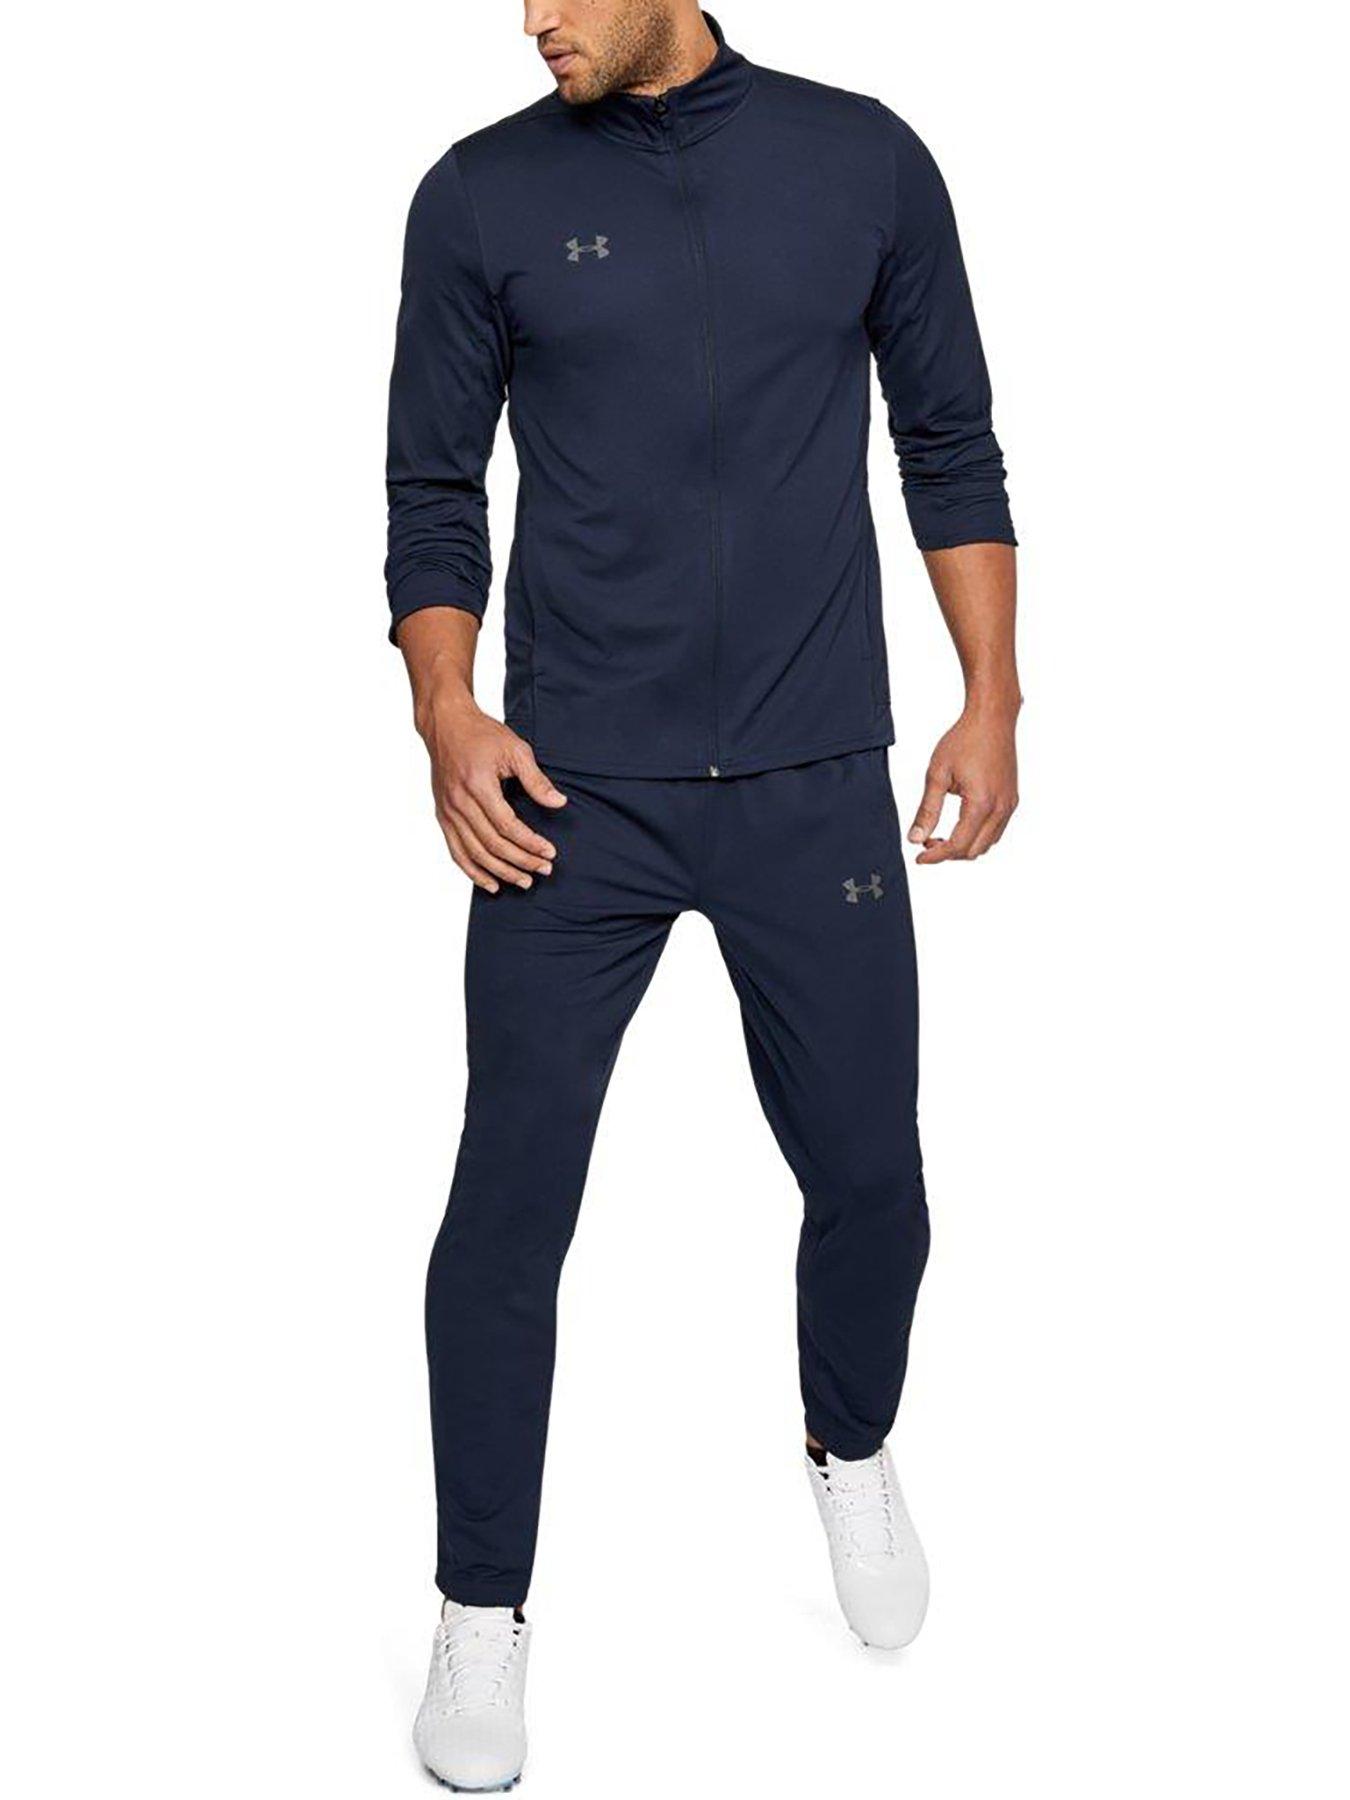 subterraneo datos hotel UNDER ARMOUR Mens Challenger Tracksuit - Navy | very.co.uk